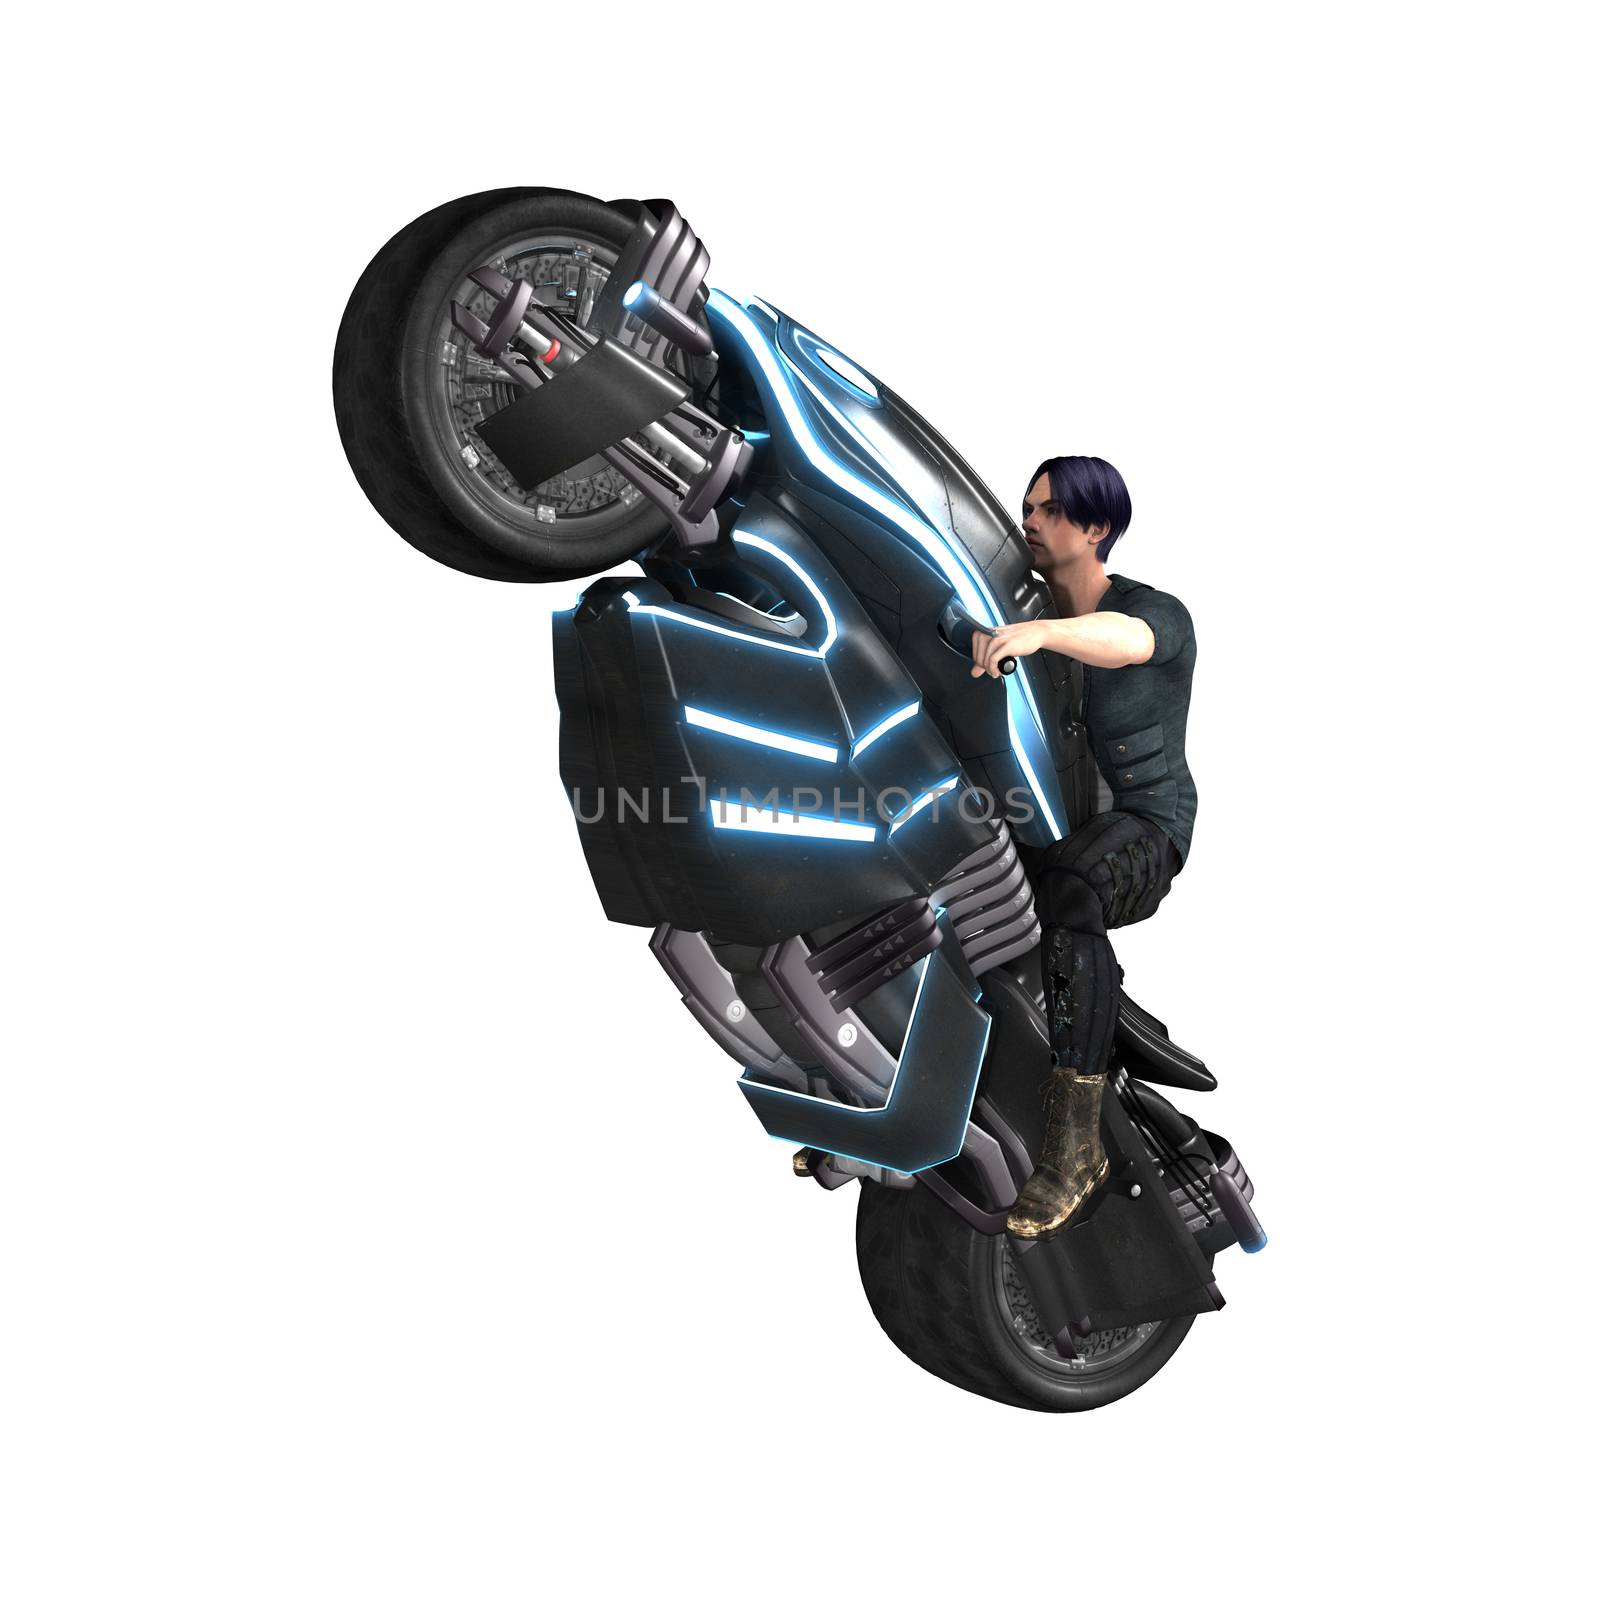 Riding a Motorcycle by Vac